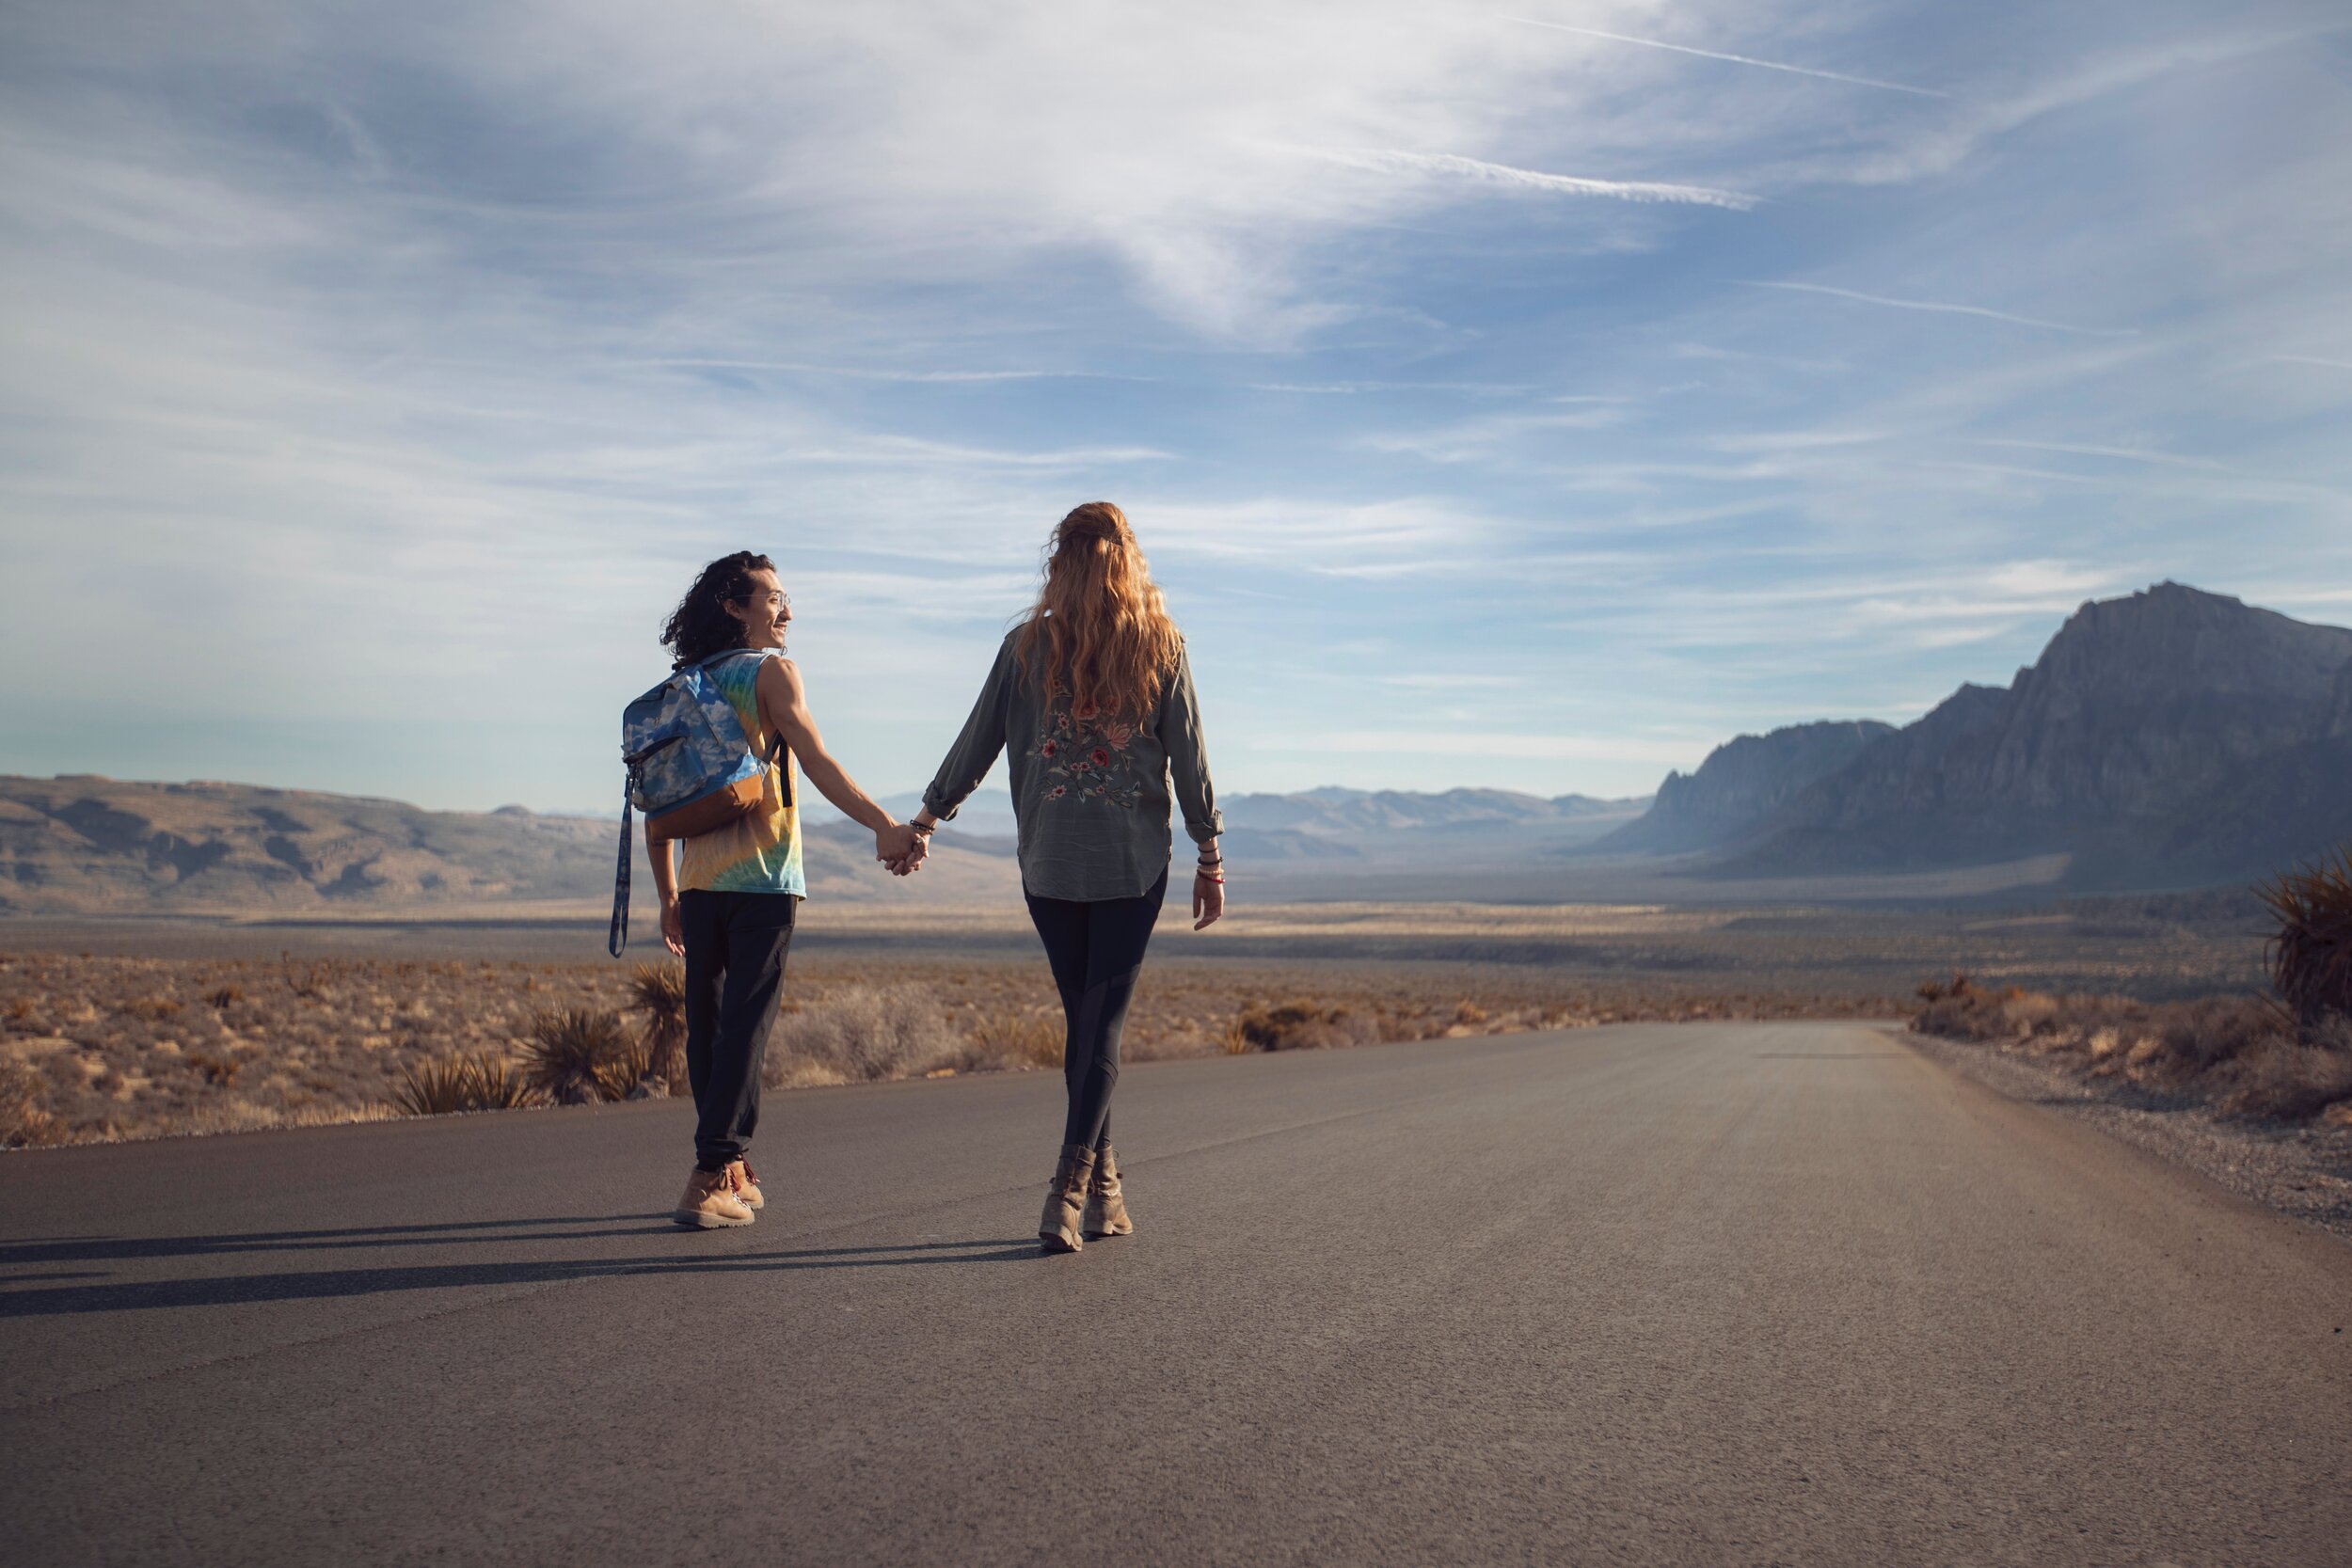 couple walking down a desert road holding hands. Image is captured from behind